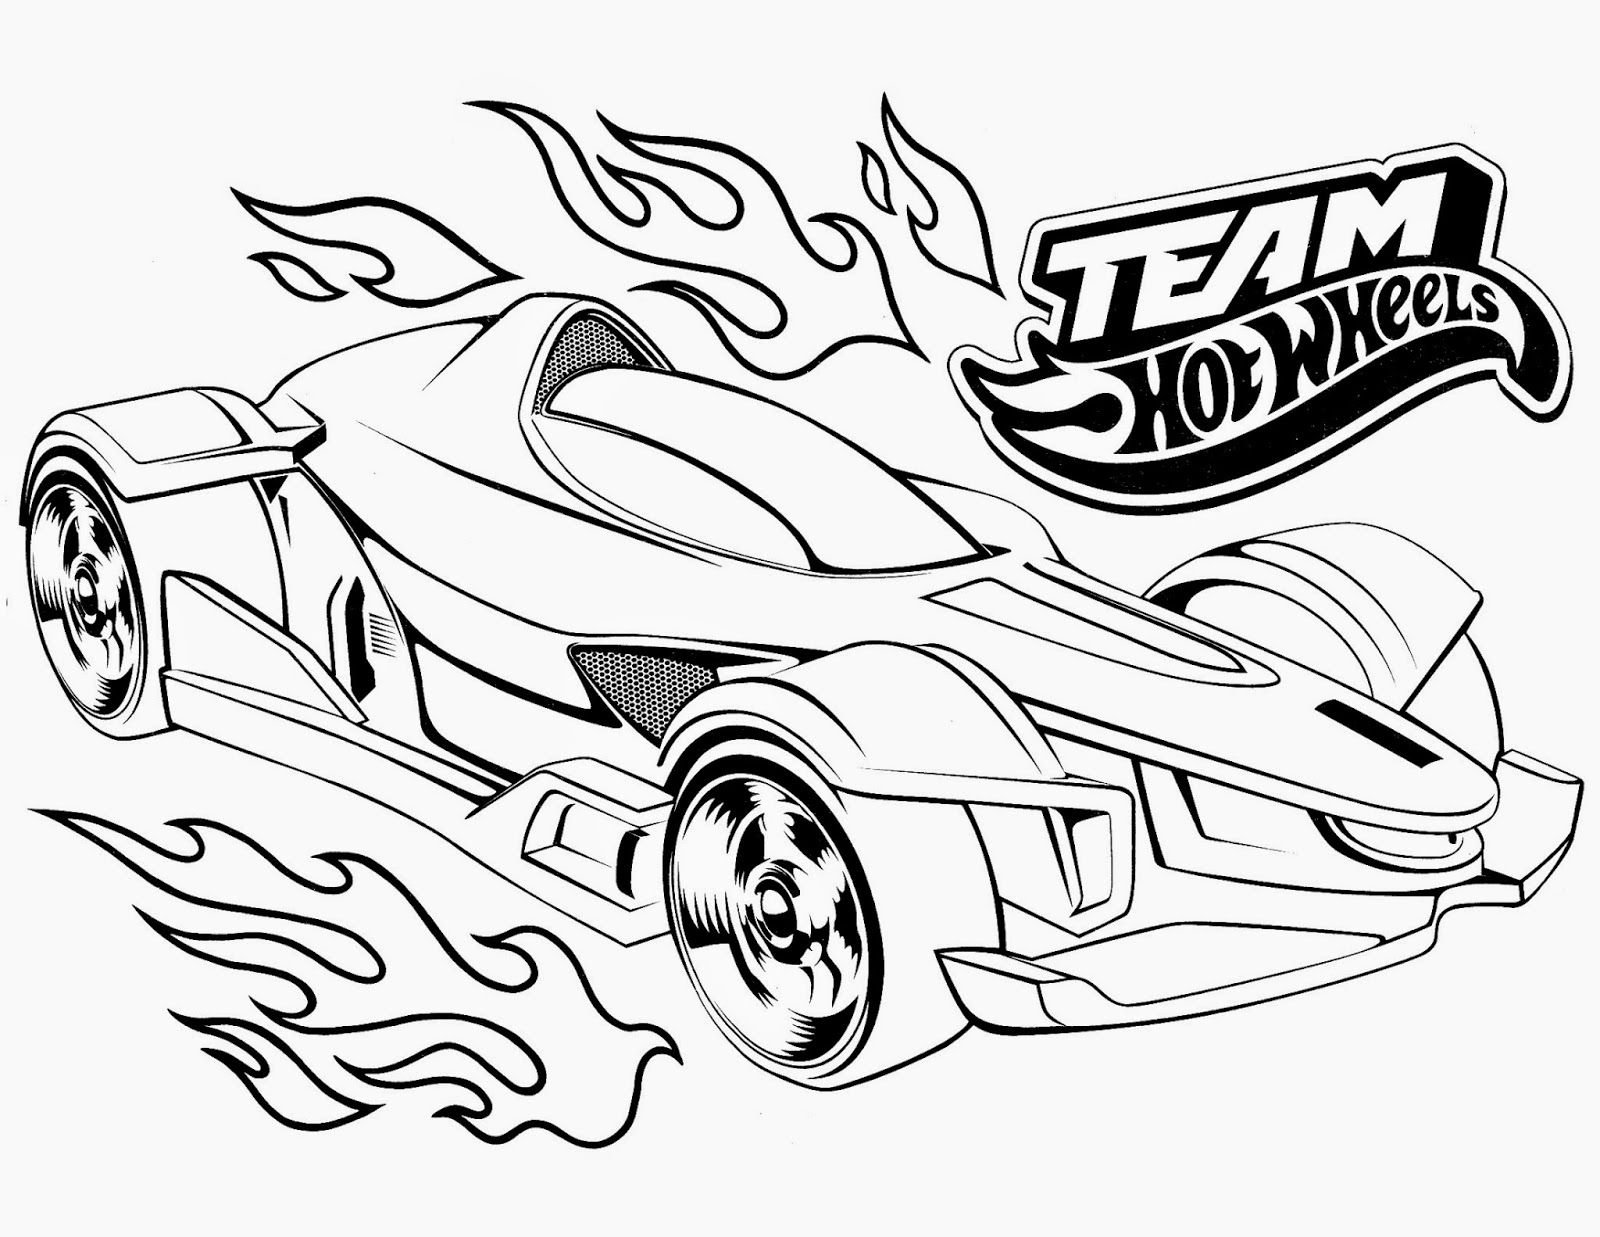 Coloring page shimmering hot wheels track